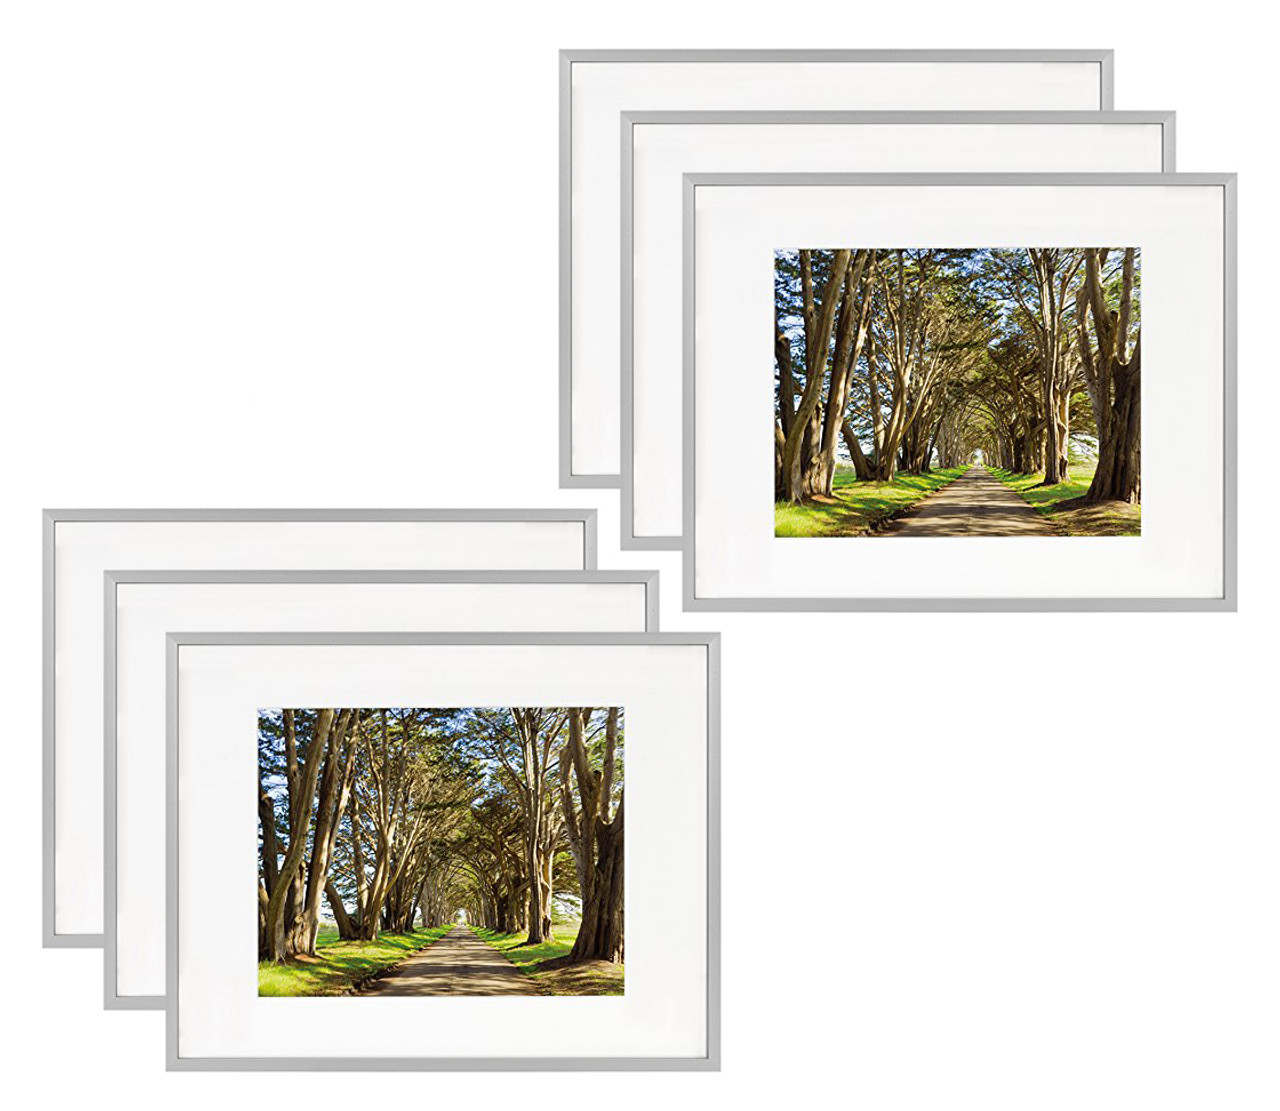 11x14 Frame for 8x10 Picture Gold Aluminum, Shiny Brushed (6 Pcs